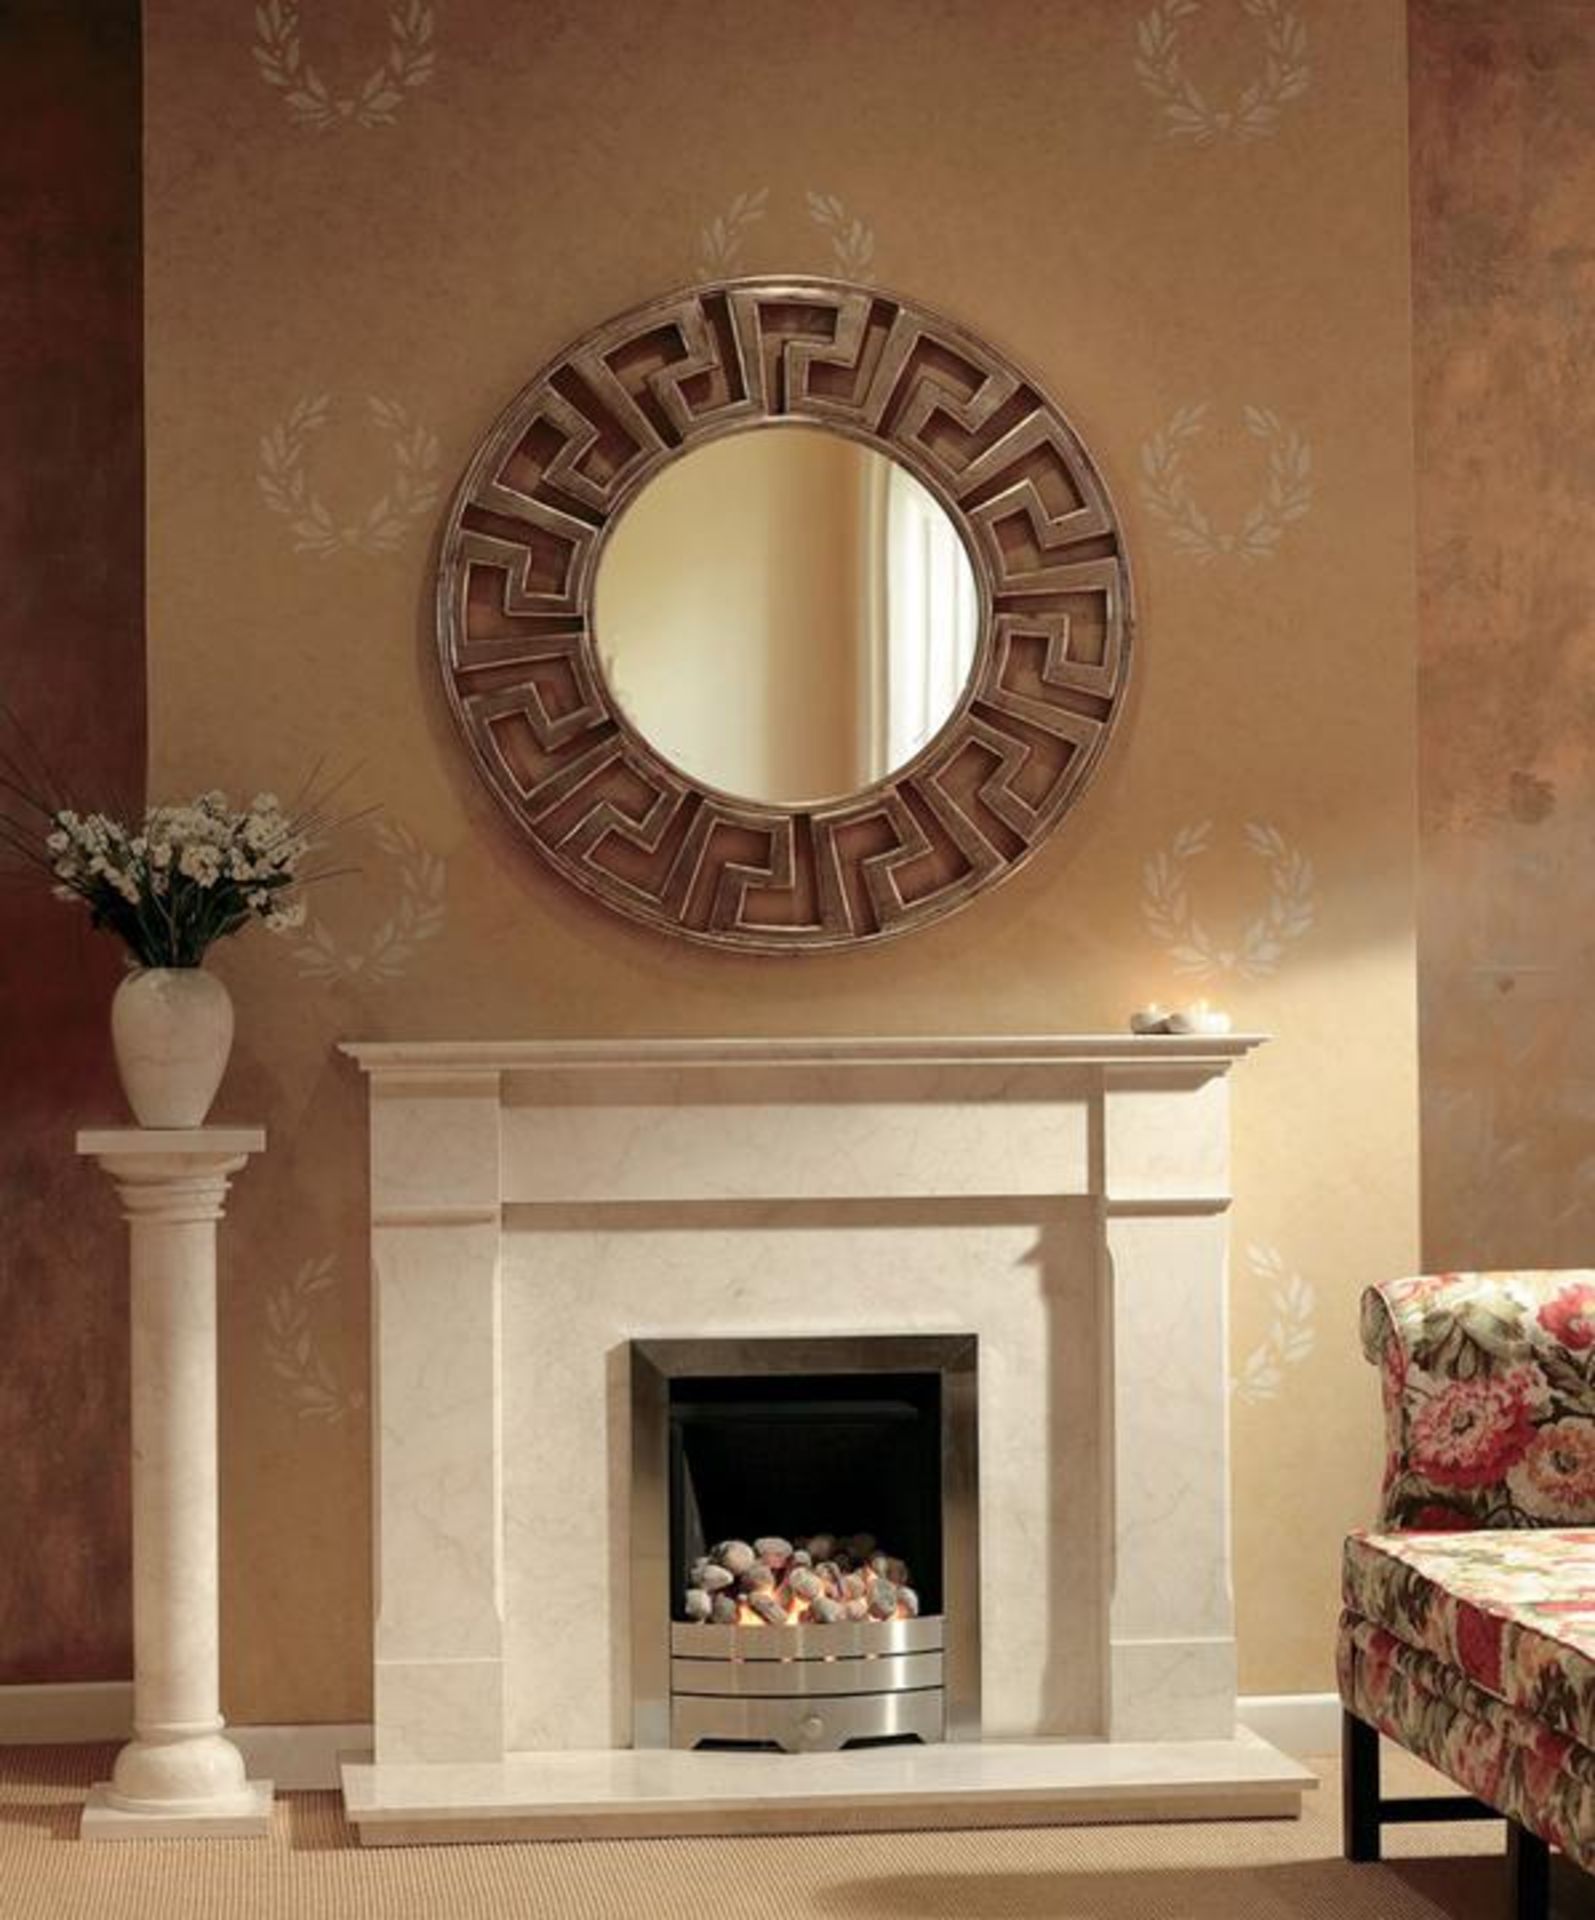 BRAND NEW MONTPELLIER FIRE SURROUND, EVITA 42 INCH LIMESTONE, The Evita fireplace is our take on a